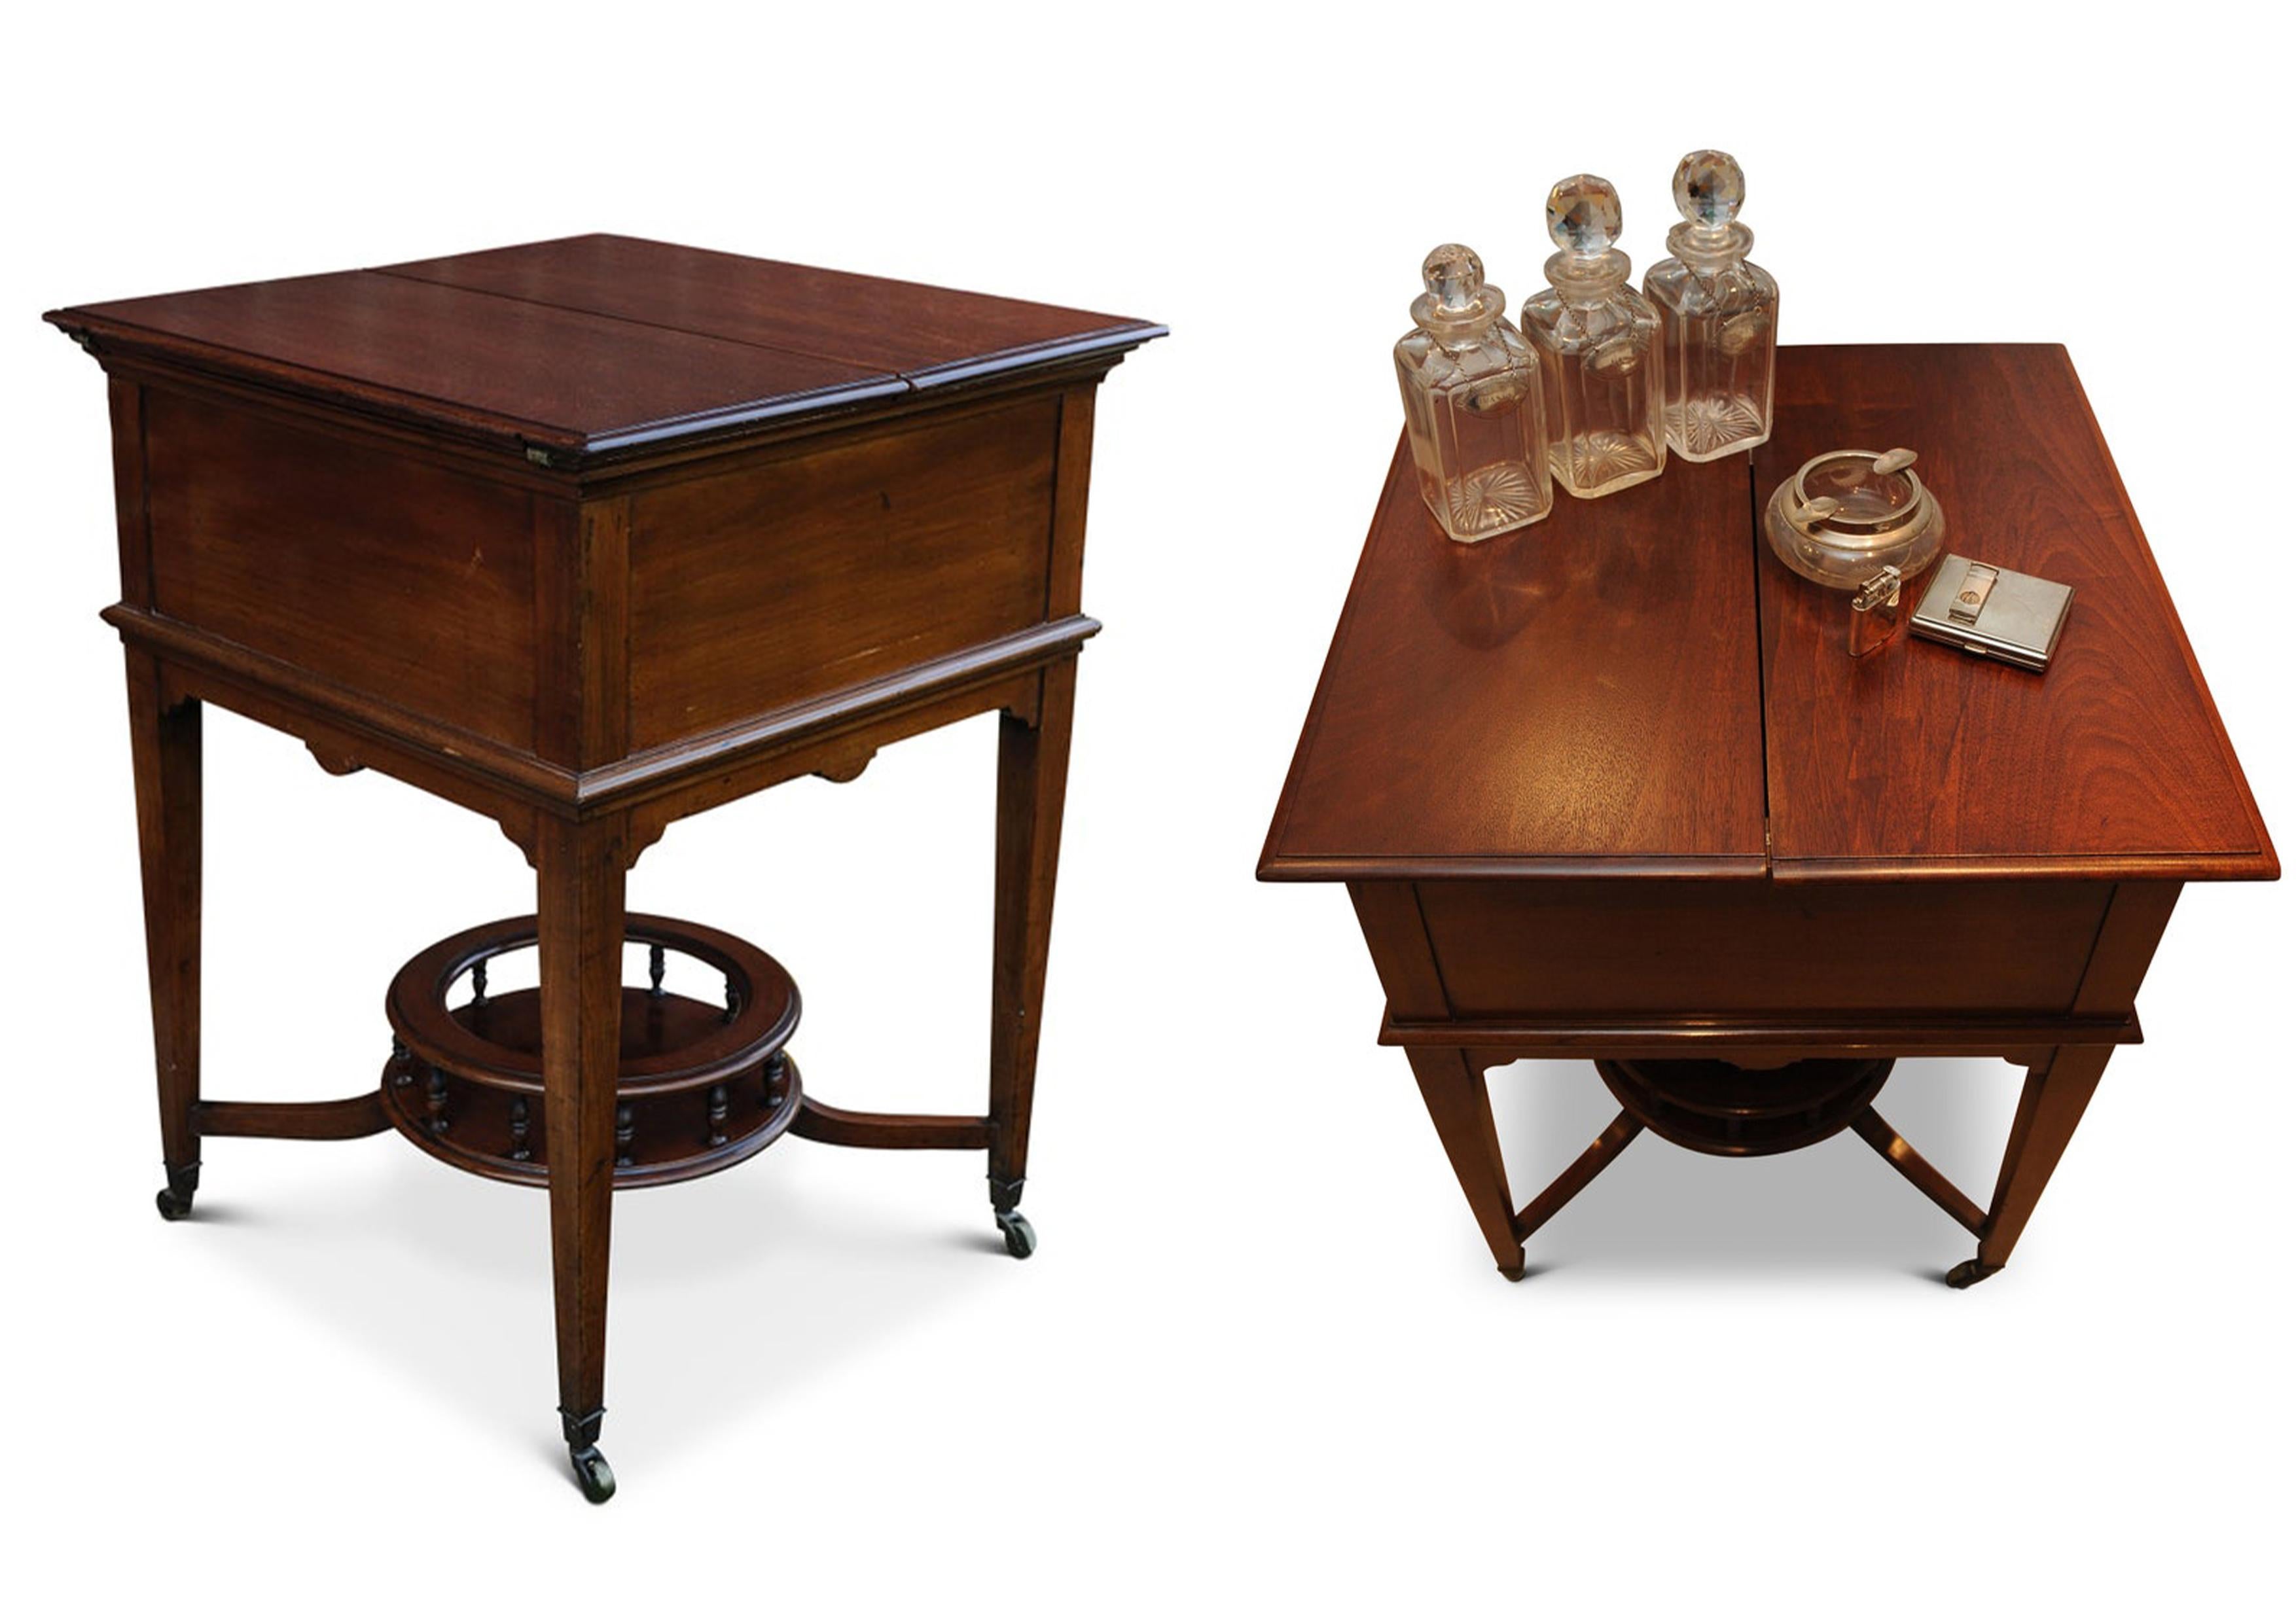 English Asprey & Co. London 1920s Mahogany Pop Up Dry Bar Drinks Cabinet and Decanters